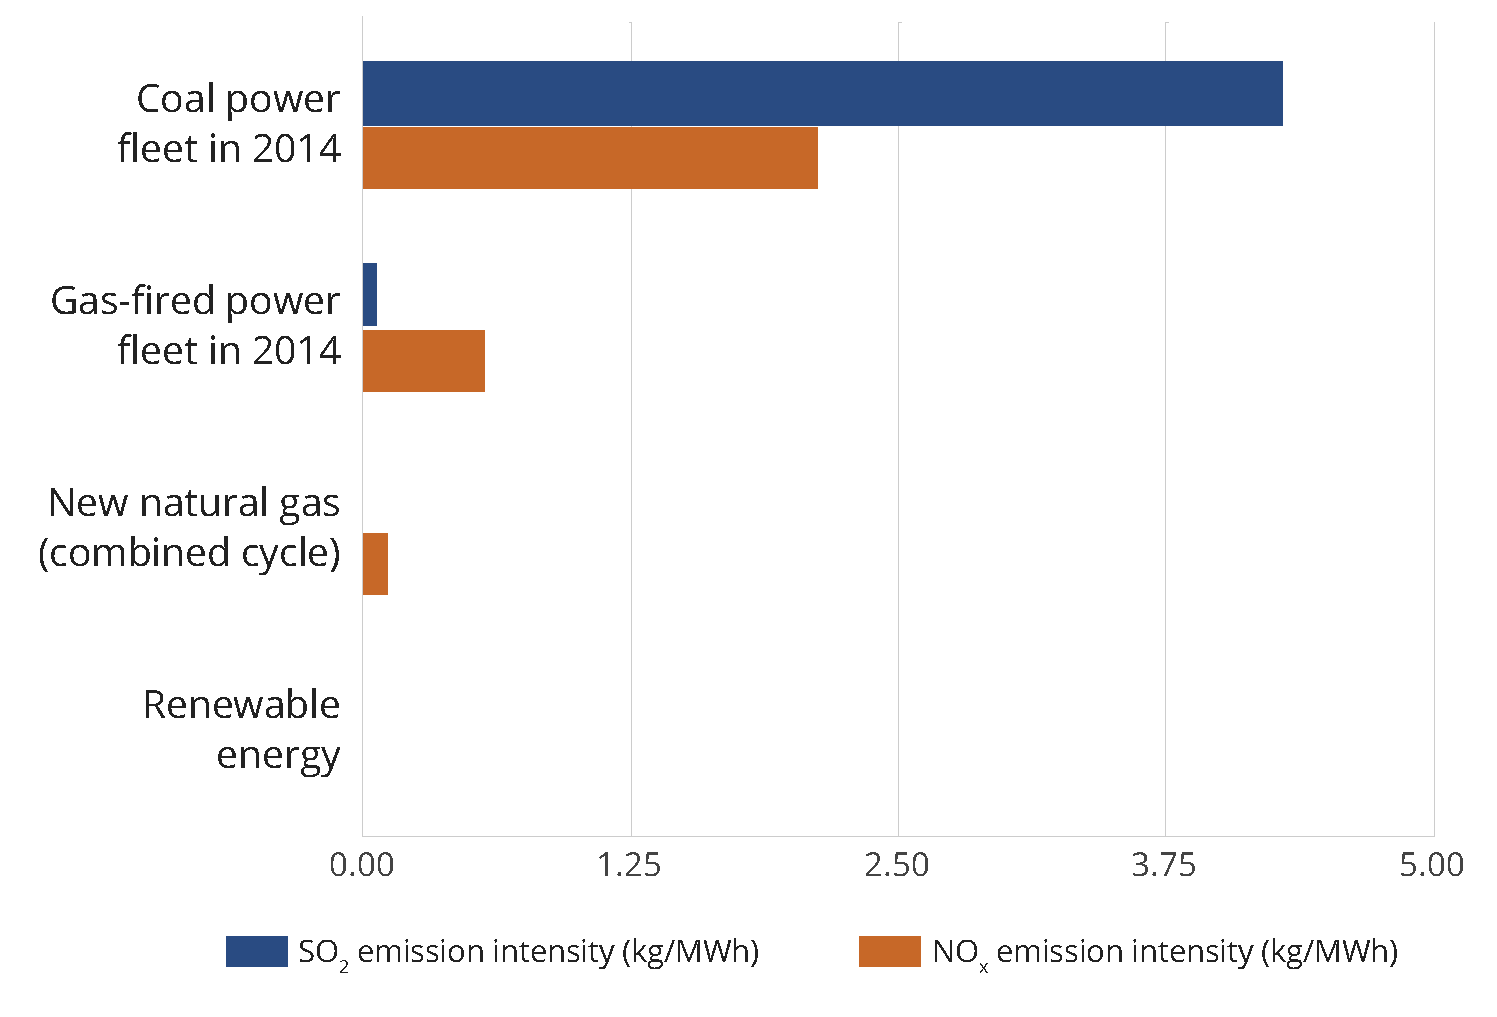  *On a megawatt-hour basis, SO2 and NOx emissions associated with coal-fired power stand an order of magnitude above other existing electricity generation options. 